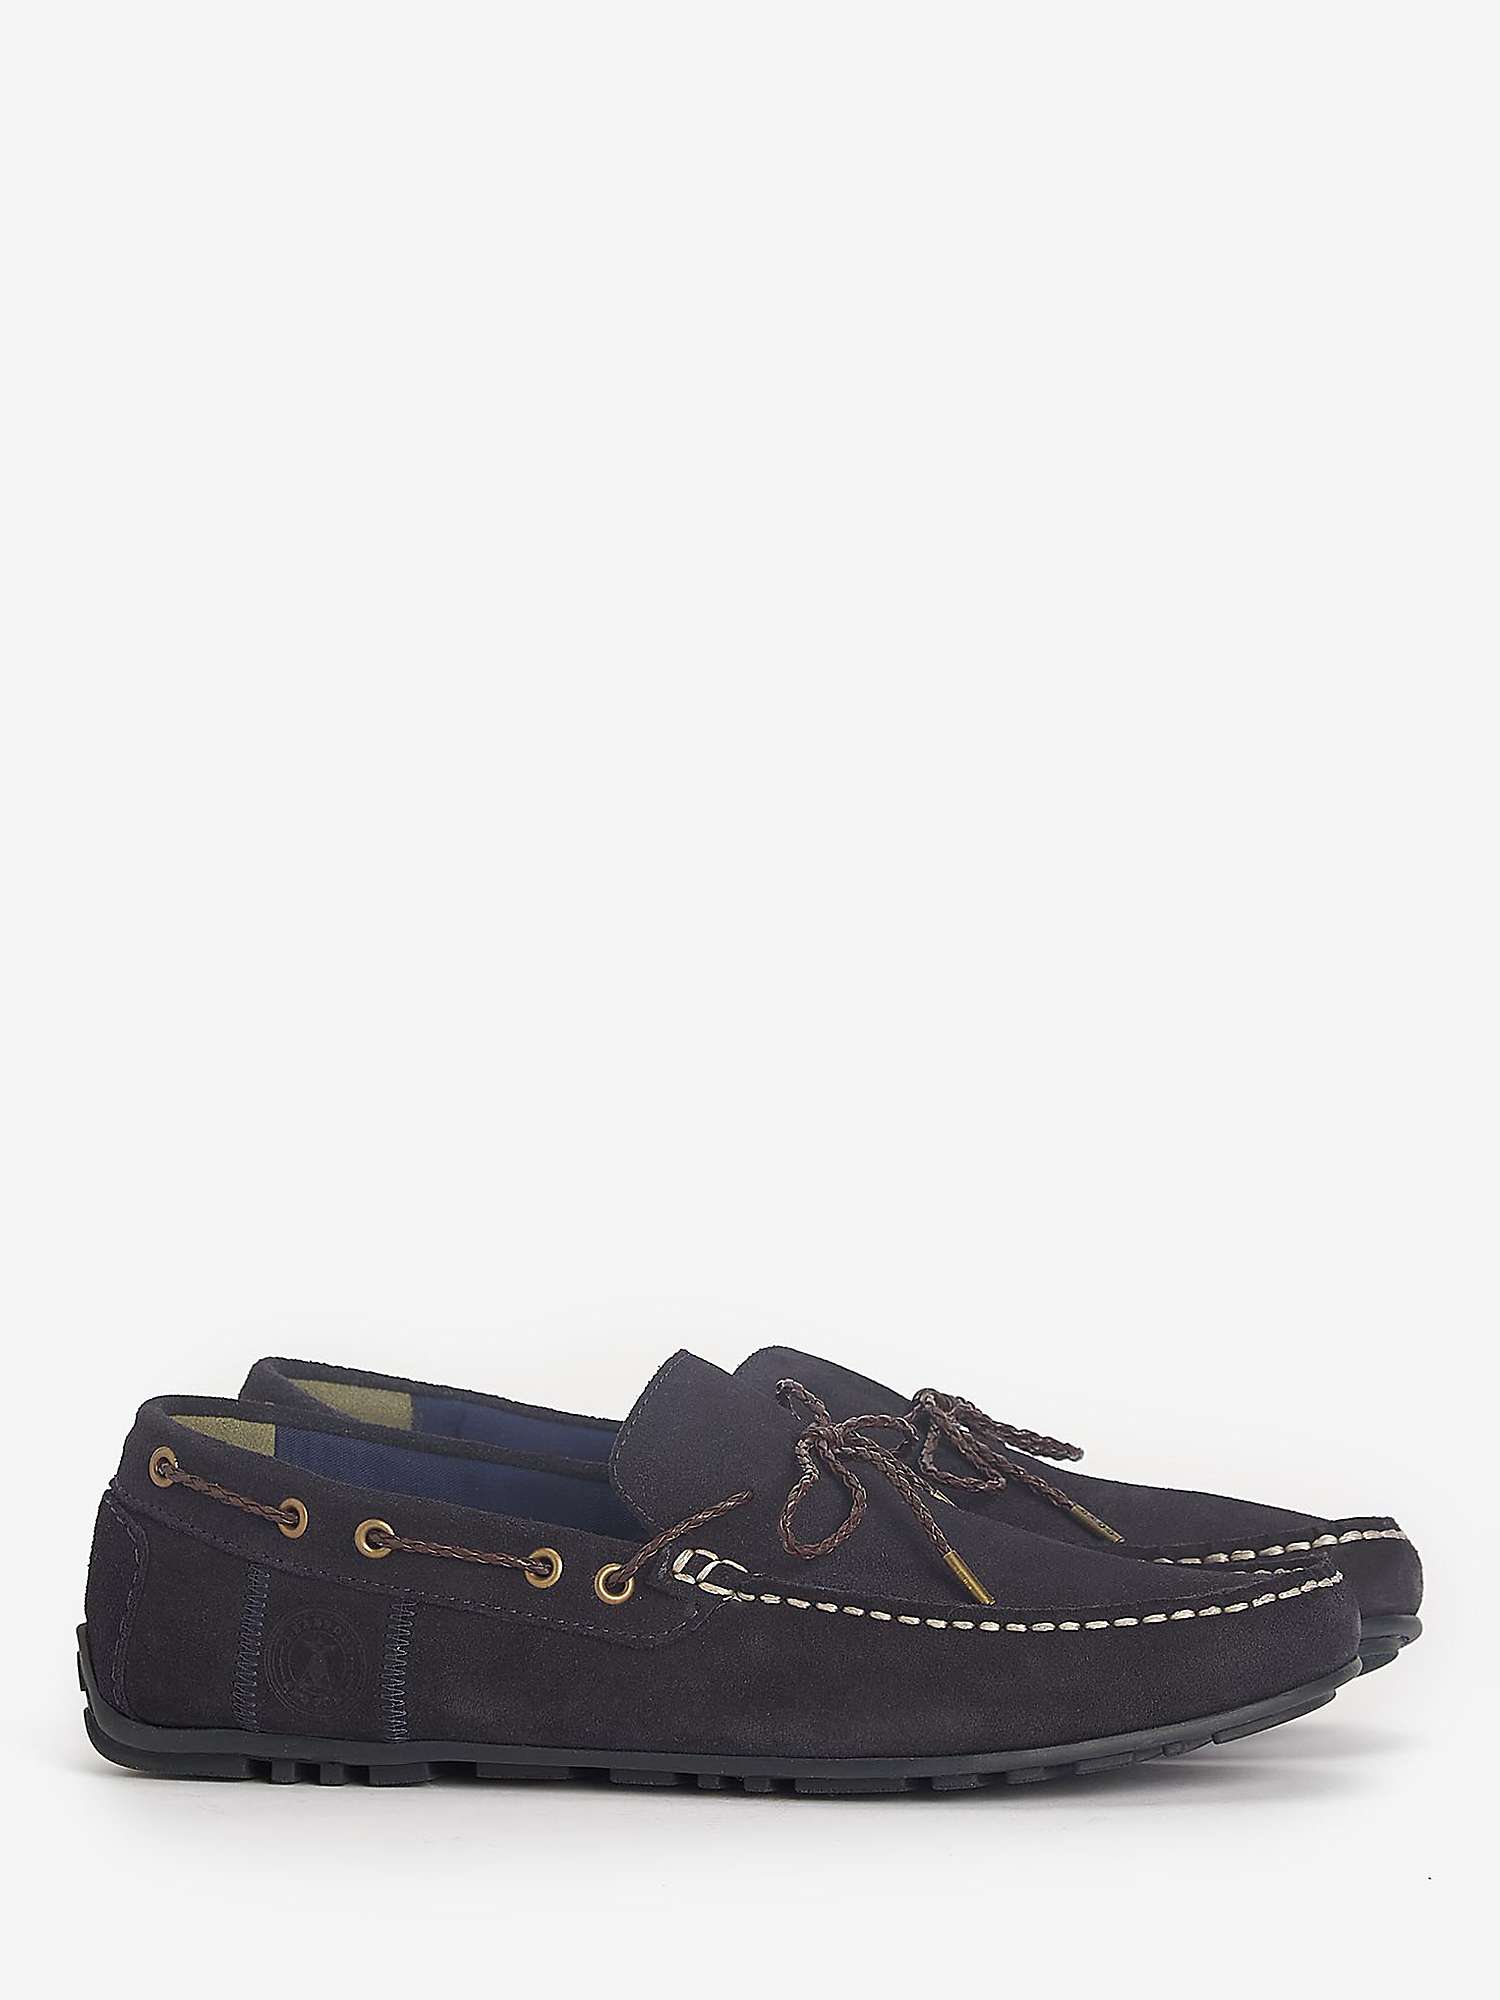 Buy Barbour Jenson Driving Shoes, Navy Online at johnlewis.com